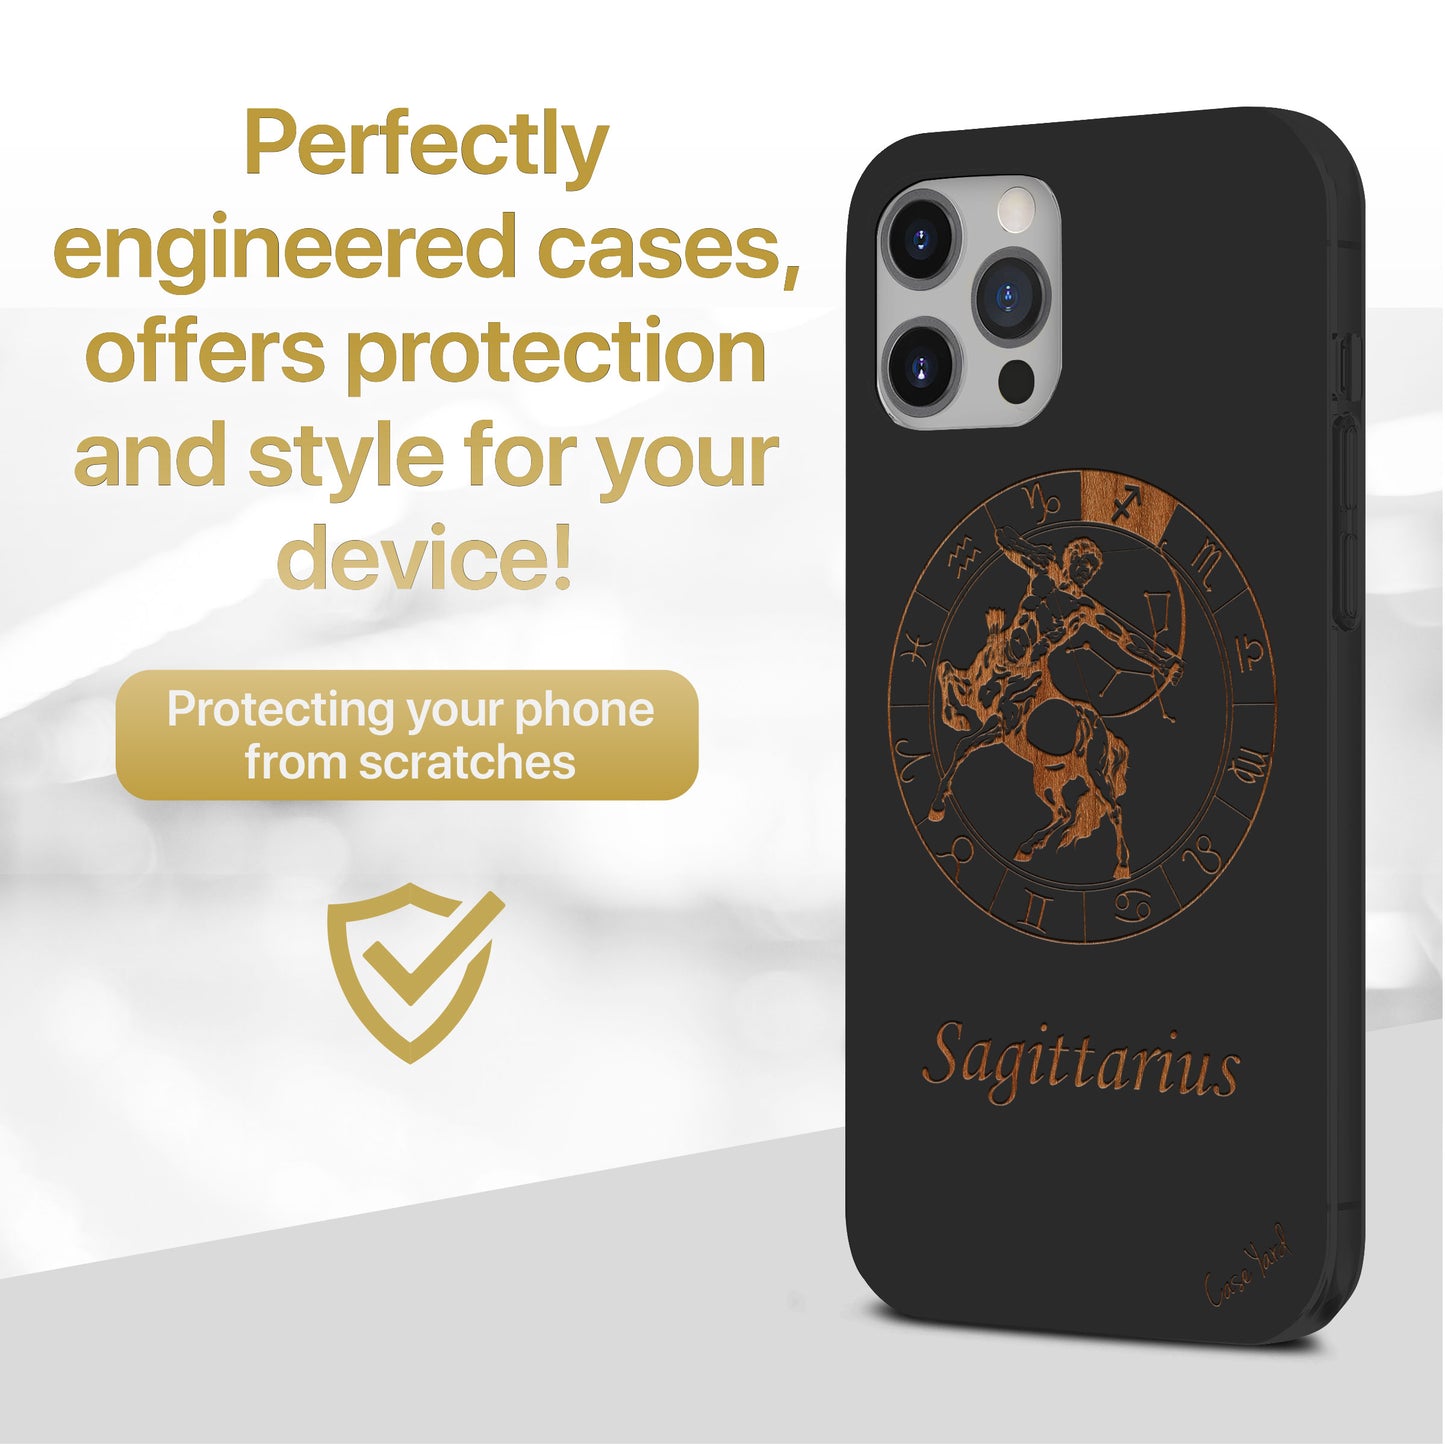 Wooden Cell Phone Case Cover, Laser Engraved case for iPhone & Samsung phone Sagittarius Sign Design